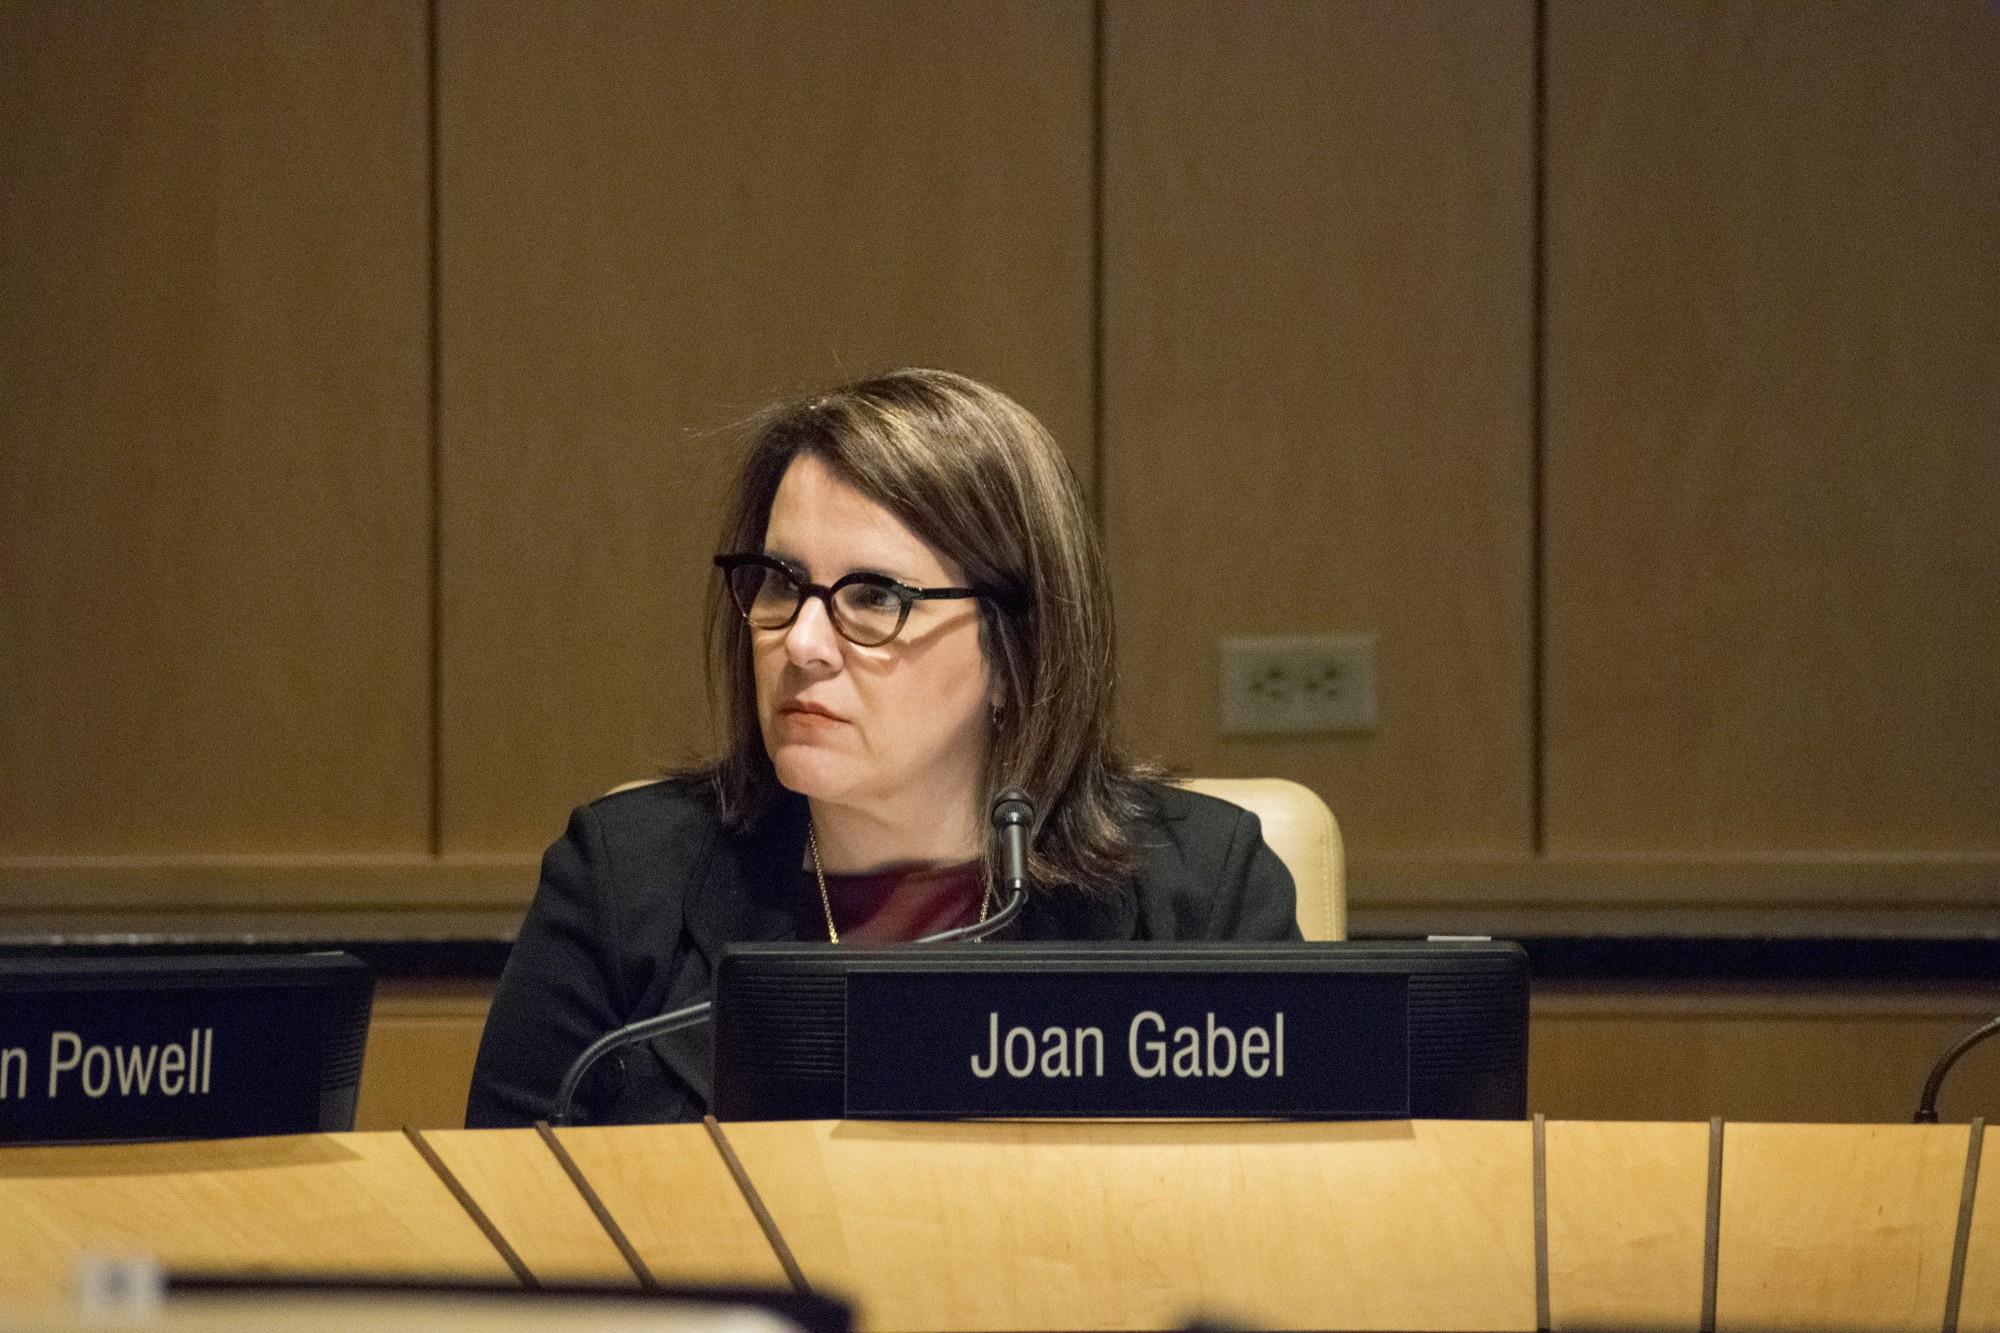 President Joan Gabel attends the Board of Regents meeting discussing on Friday, Feb. 14, 2020. The Board of Regents holds a meeting each month.